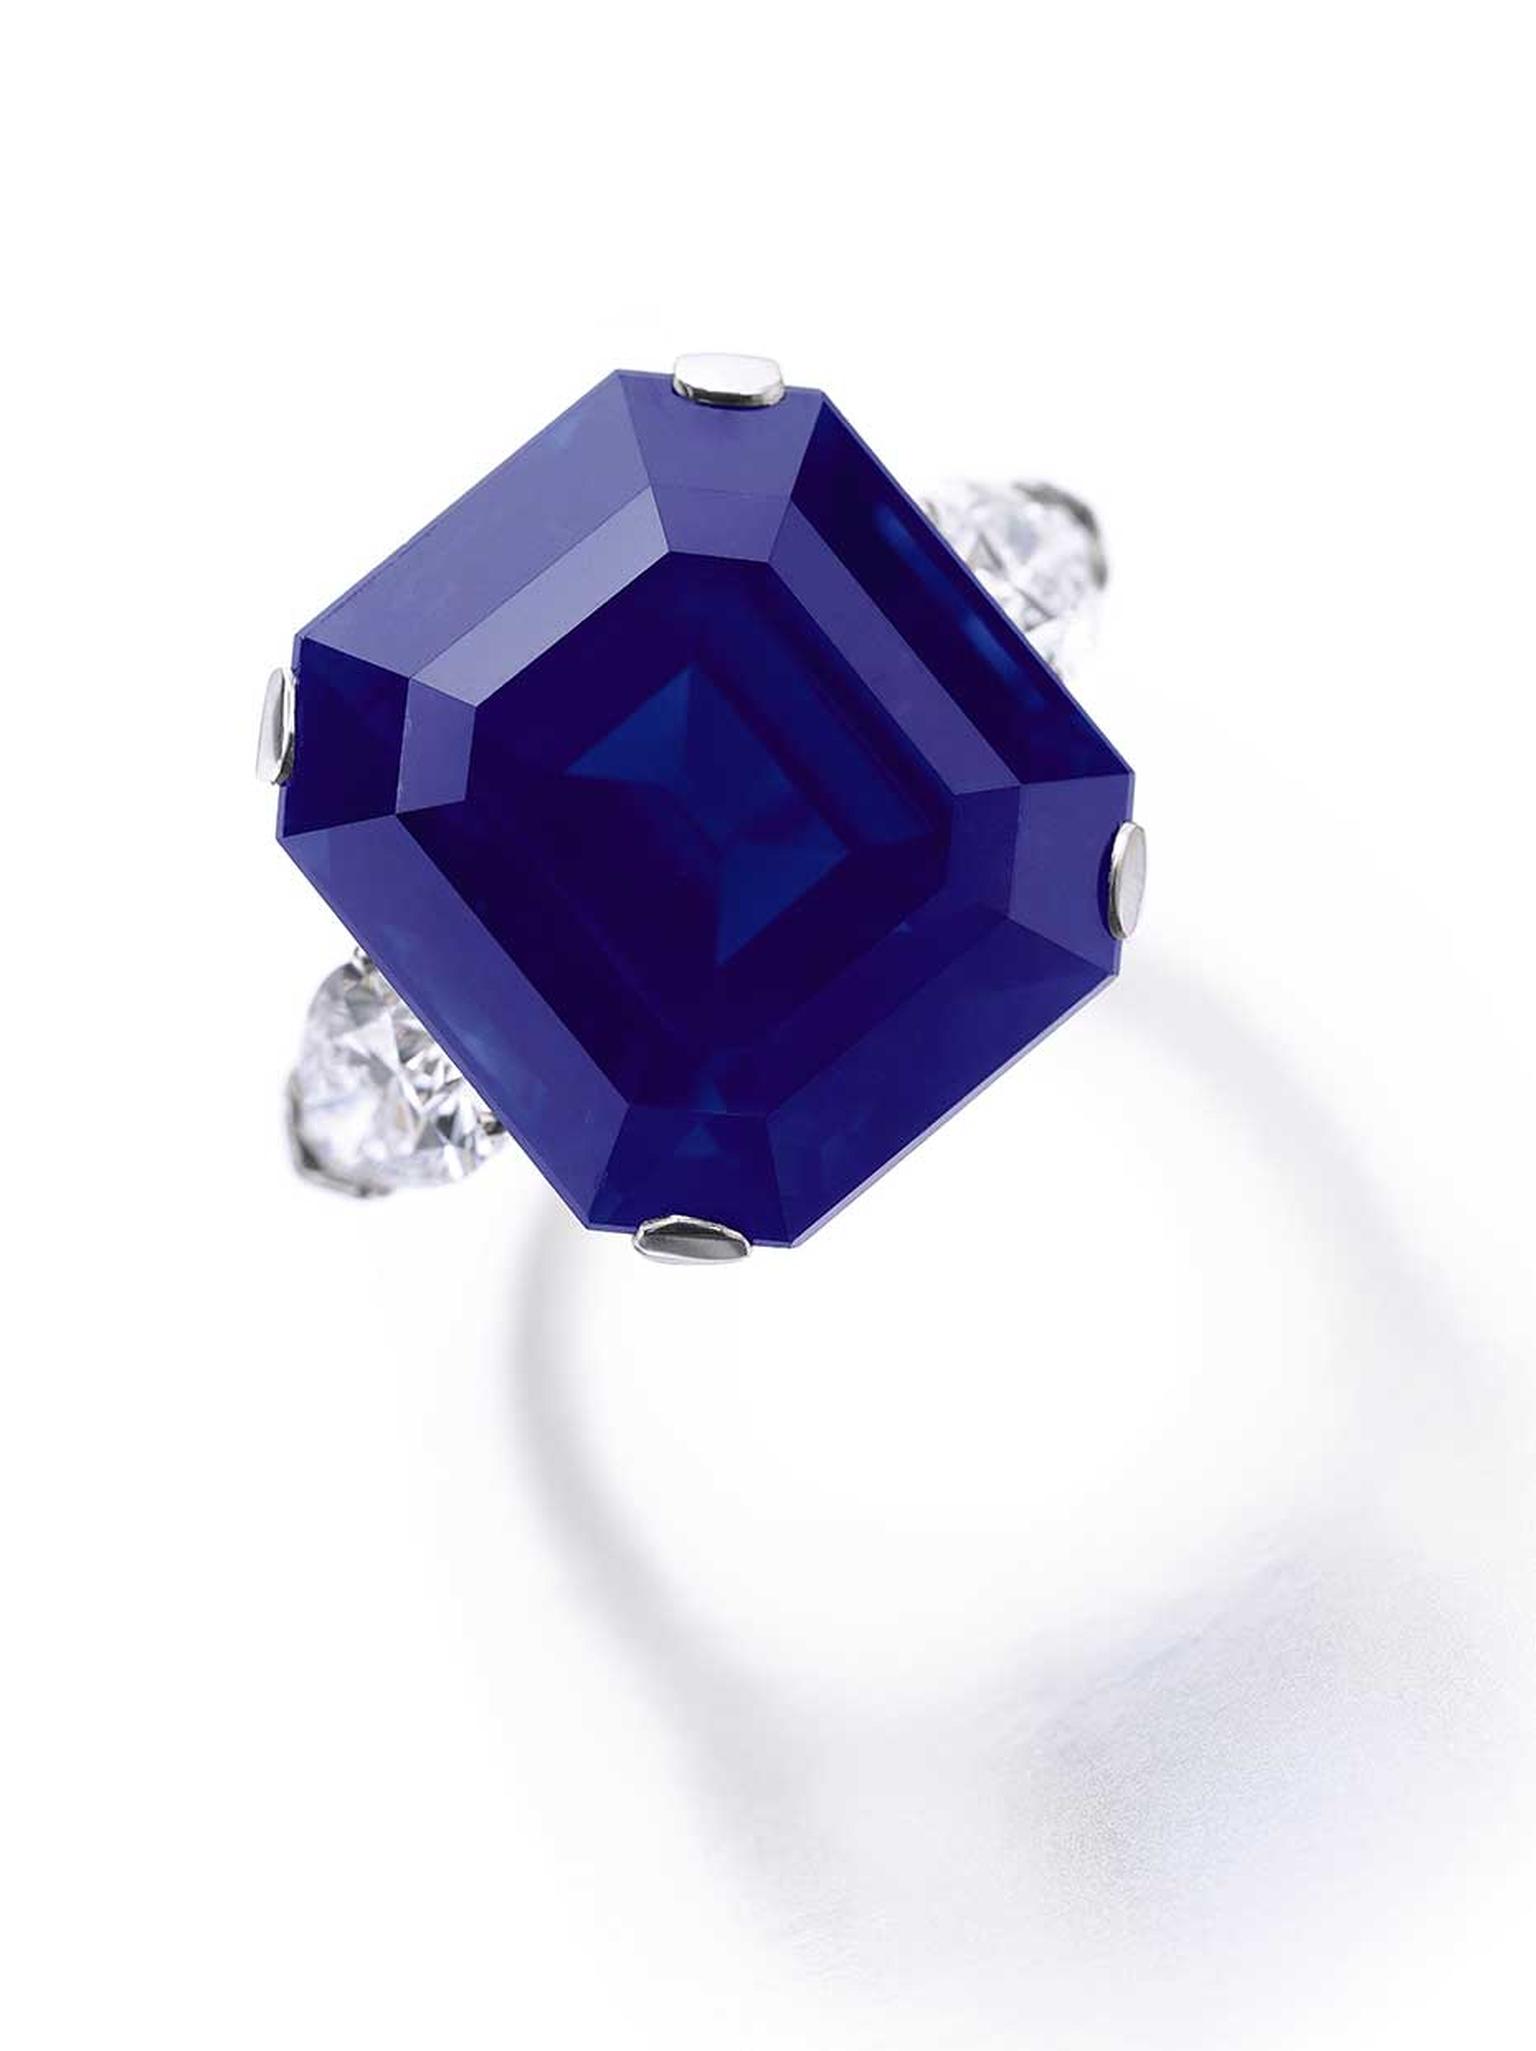 Another world record was also set at Sotheby's Magnificent and Noble Jewels sale in Geneva by a 27.54ct step-cut Kashmir sapphire with a rare saturated velvety colour. It sold for $5.98 million to become the most valuable Kashmir sapphire in the world.